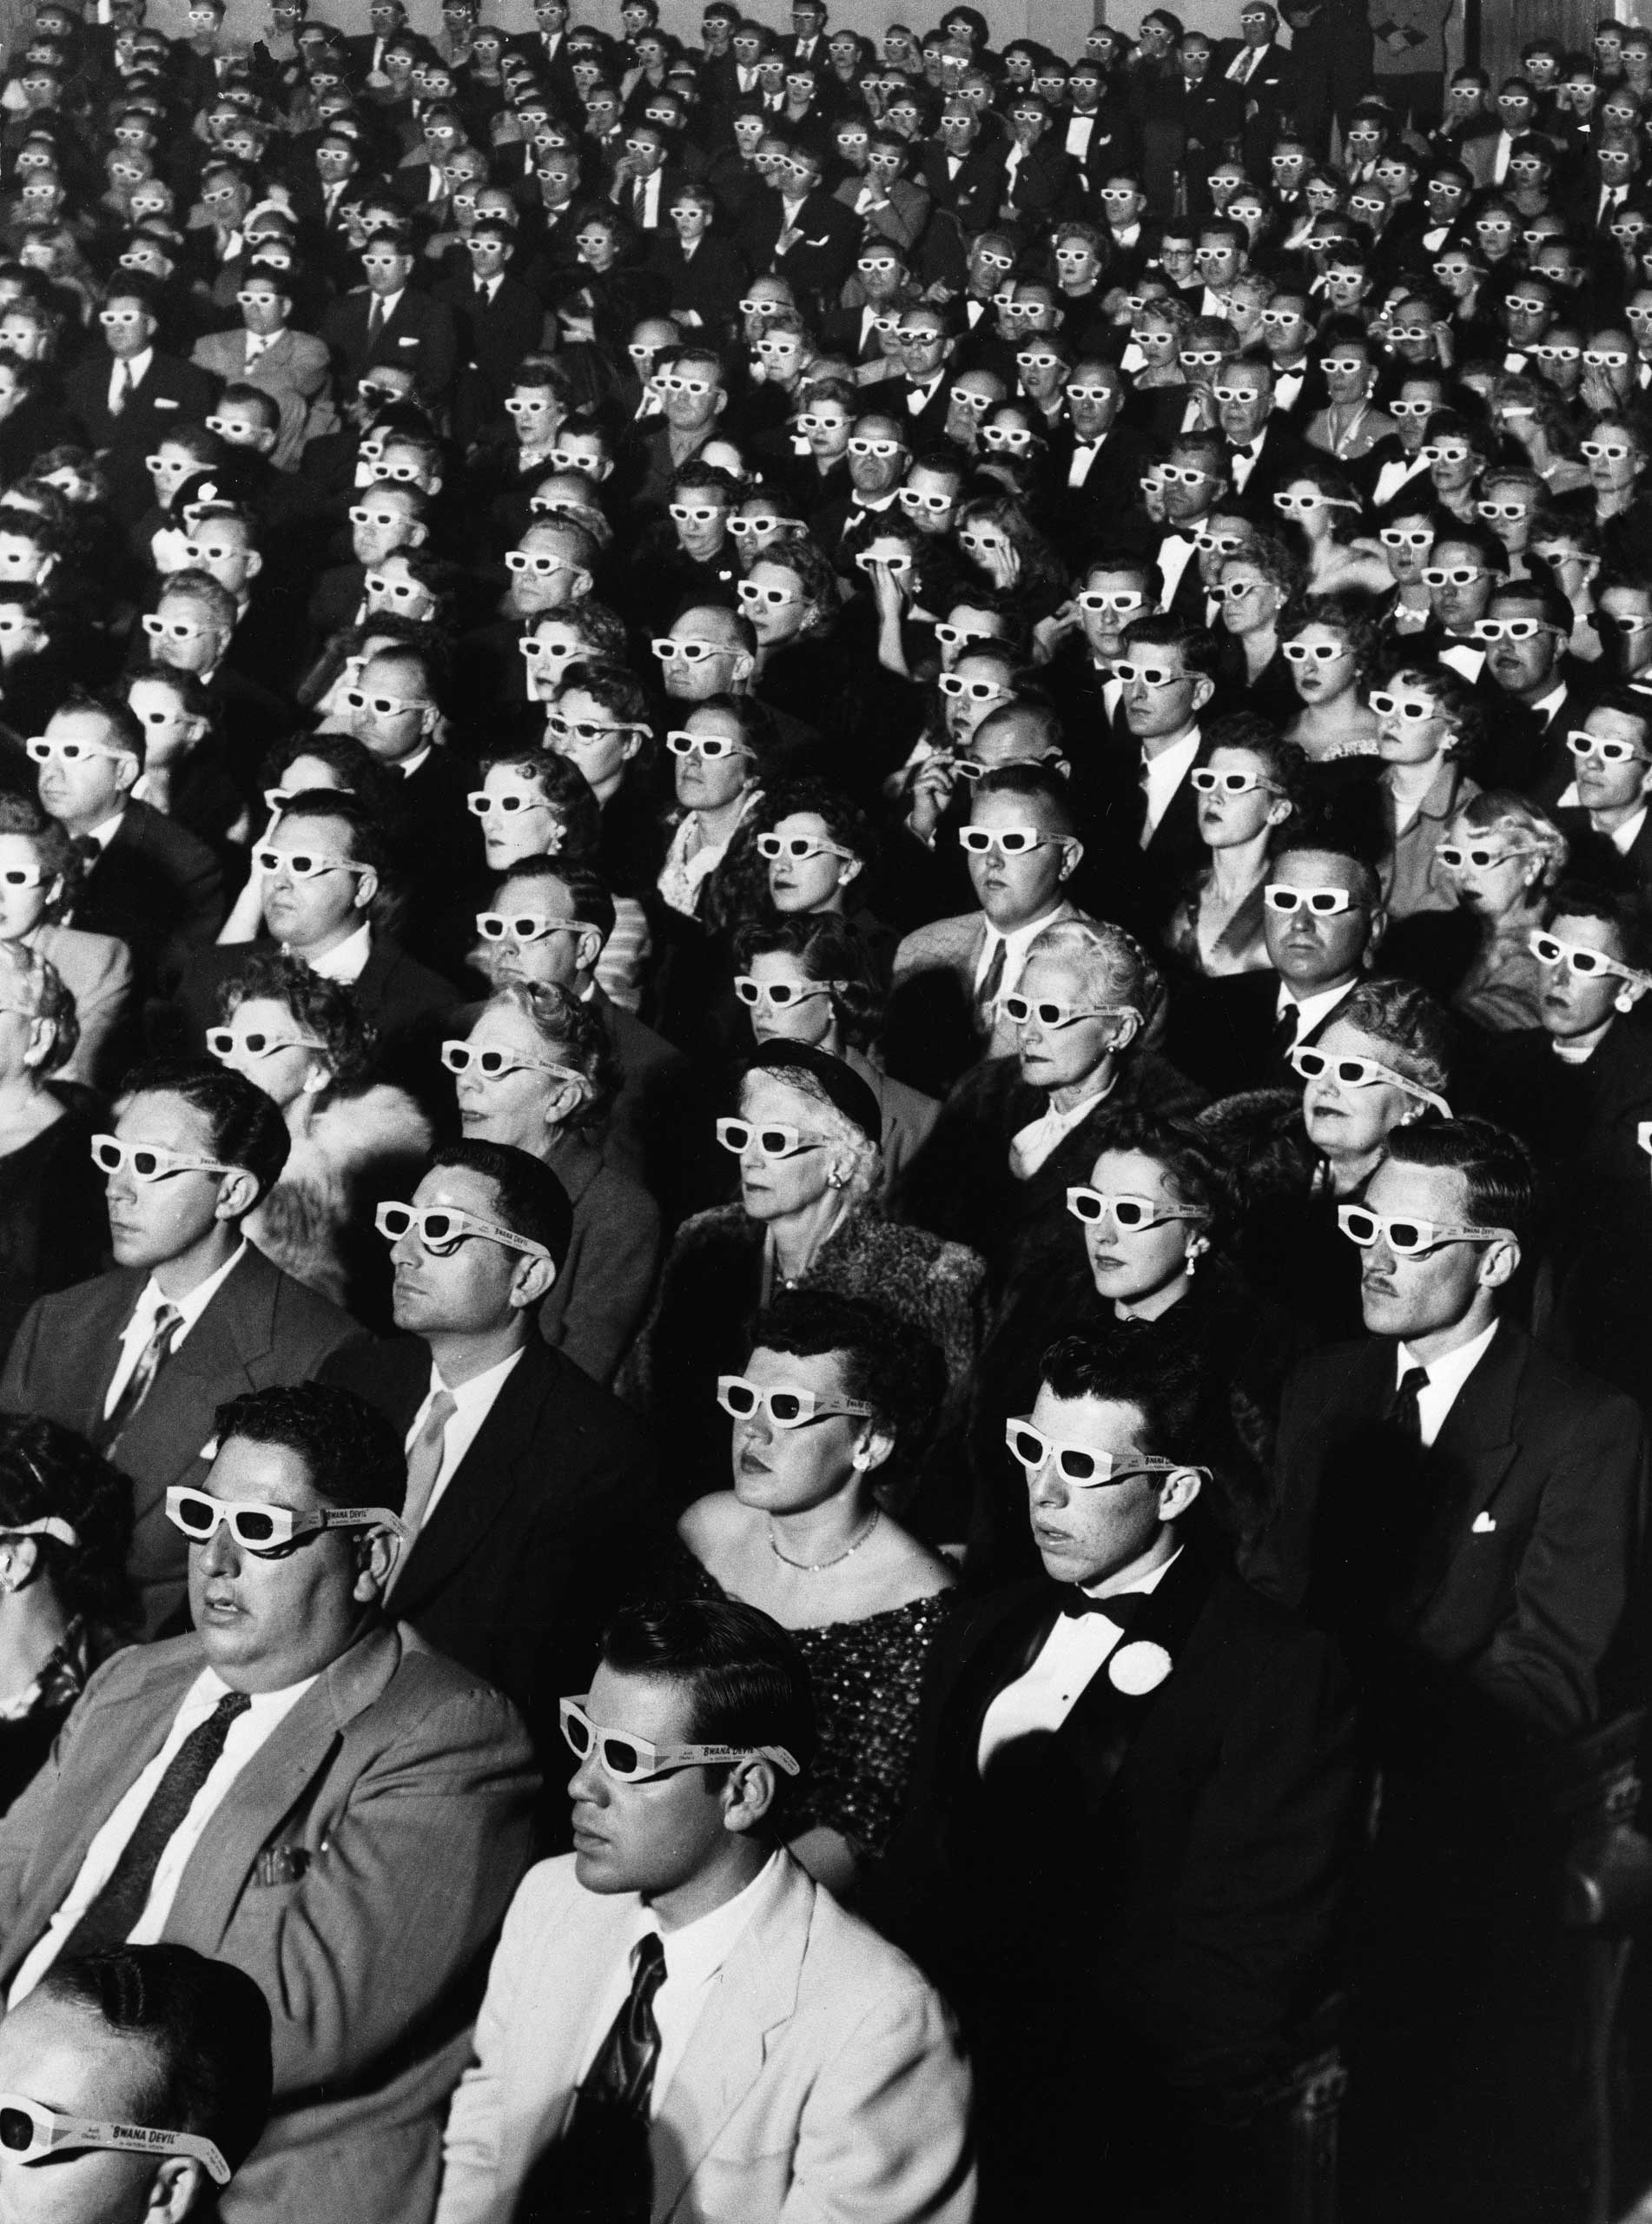 Riveted audience members enjoy opening night of the first full-length American 3-D feature film: the Arch Oboler-directed drama, Bwana Devil. Originally published in the December 15, 1952, issue of LIFE.